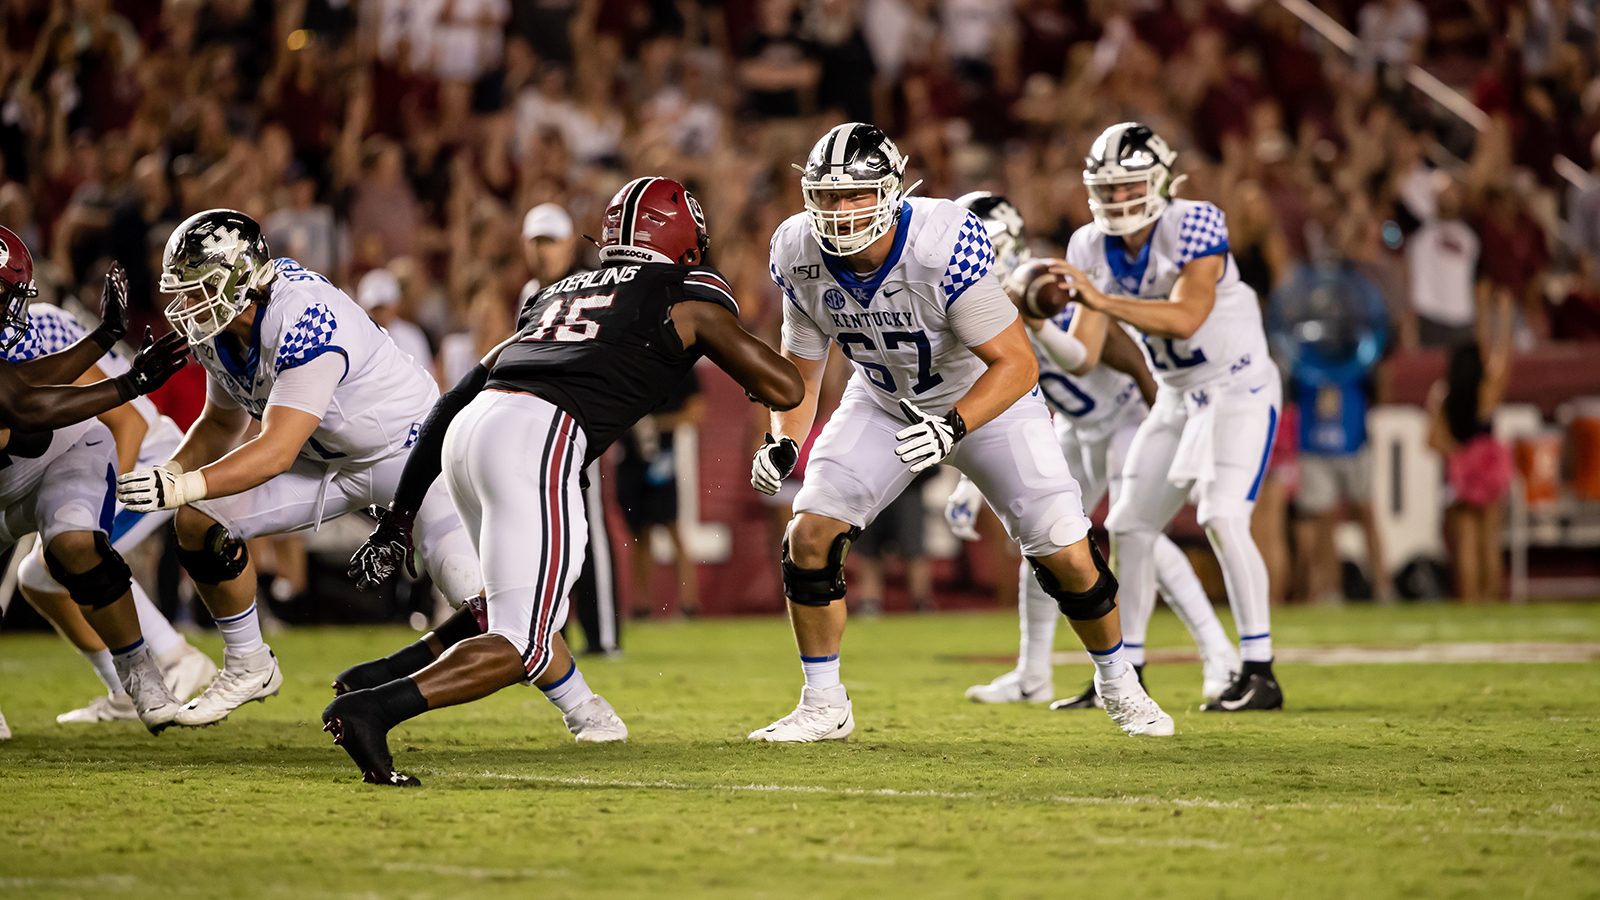 FB: Offensive, Defensive Lines Helping to Improve Each Other